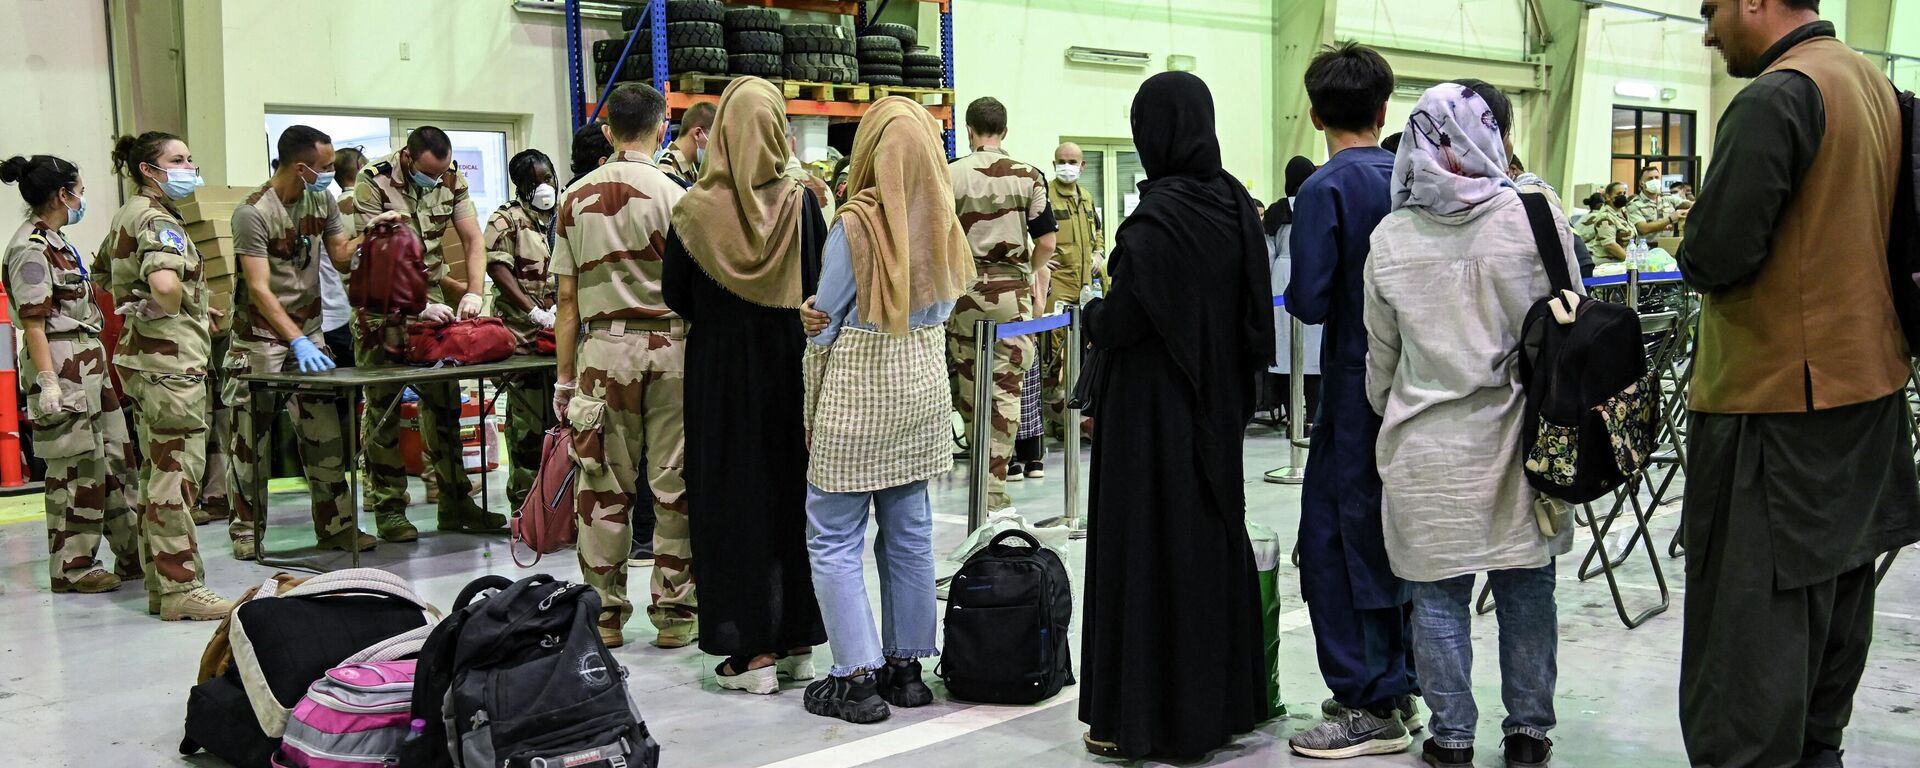 In this file photo taken on August 23, 2021 People wait to have their luggages checked by soldiers in a reunion and evacuation center at the French military air base 104 of Al Dhafra, near Abu Dhabi, after being evacuated from Kabul as part of the operation Apagan. - Sputnik International, 1920, 13.08.2022